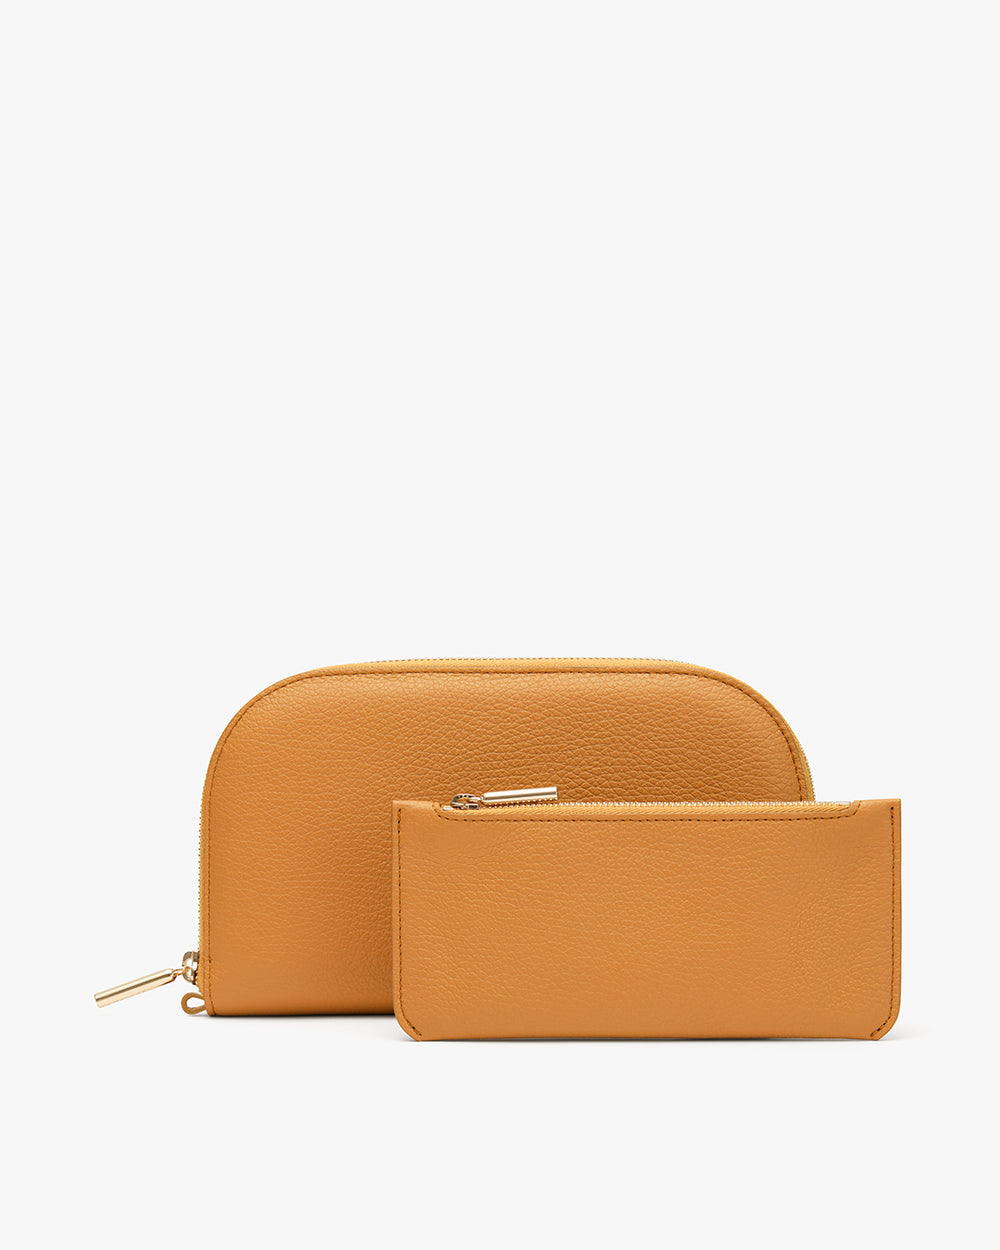 Two wallets, one large with a curved top, one smaller and rectangular.